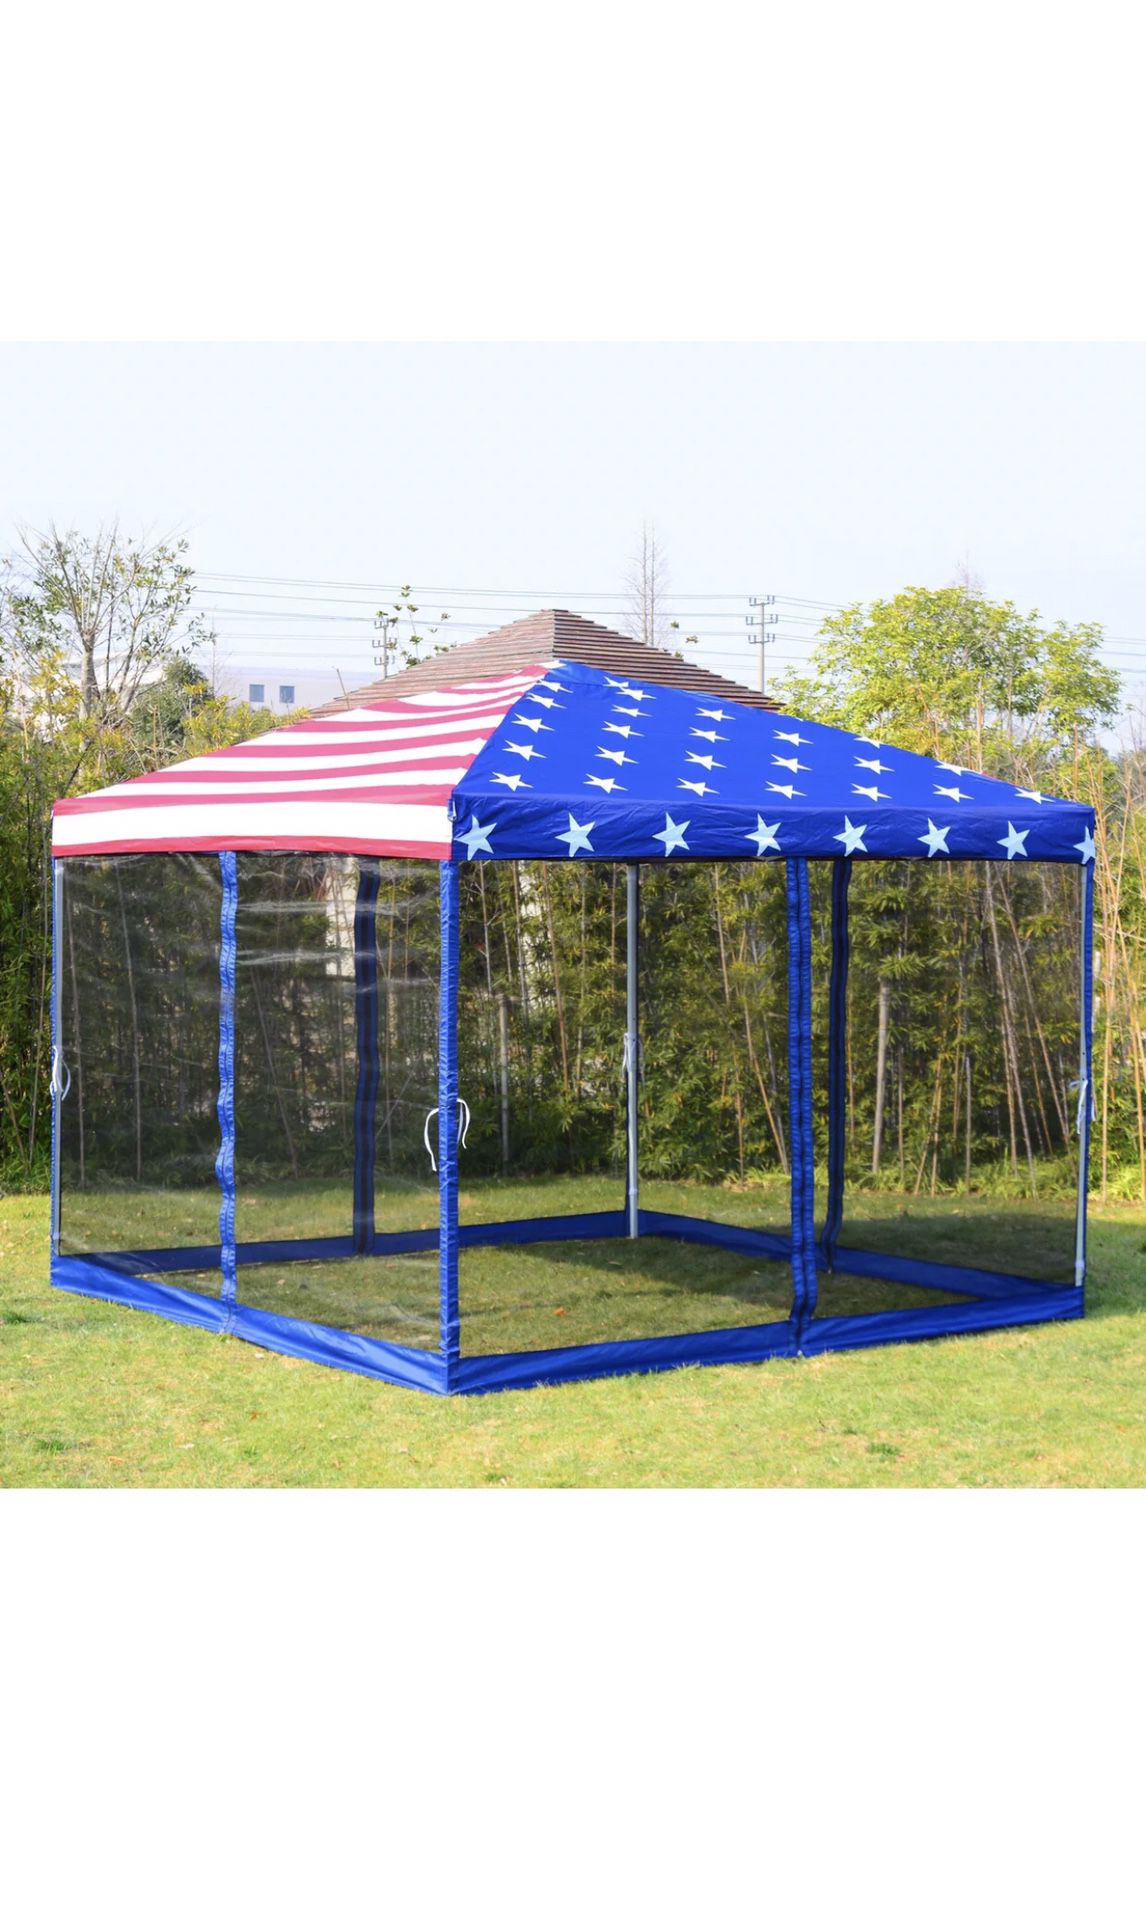 10’x10’ Outdoor Patio Easy Pop Up Party Tent Gazebo Canopy Mesh American Flag